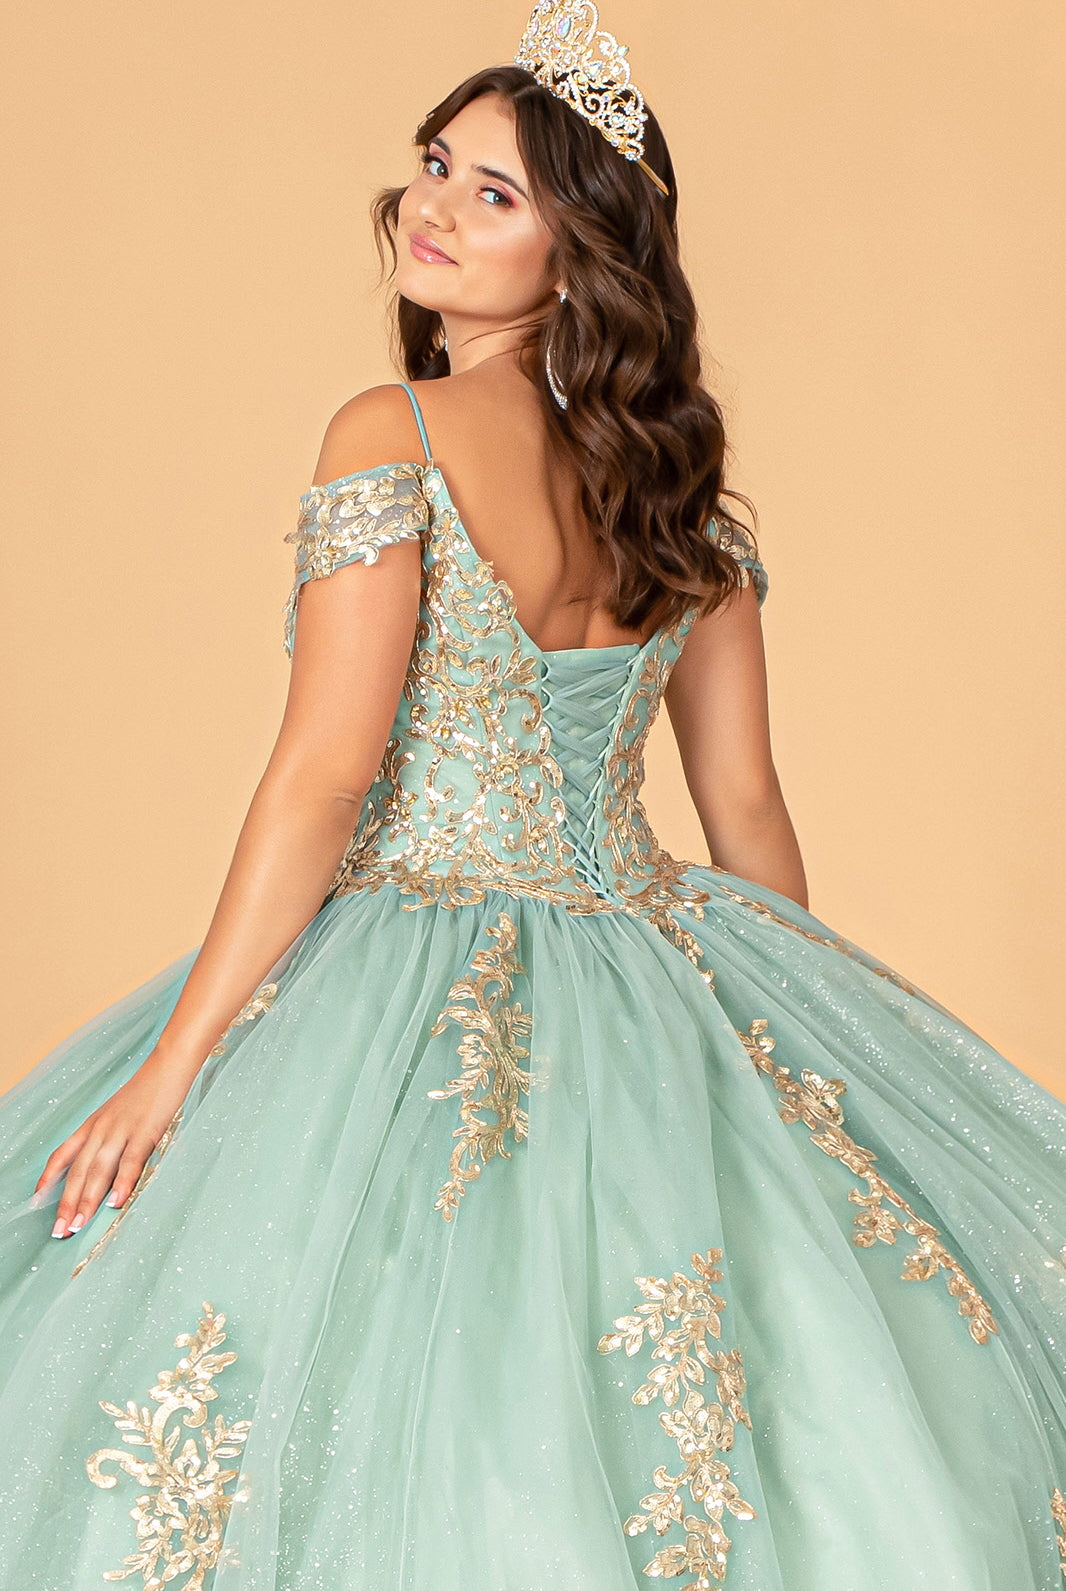 Gold Embroidered Mesh Quinceanera Ball Gown Corset Back GLGL3100-QUINCEANERA-smcfashion.com